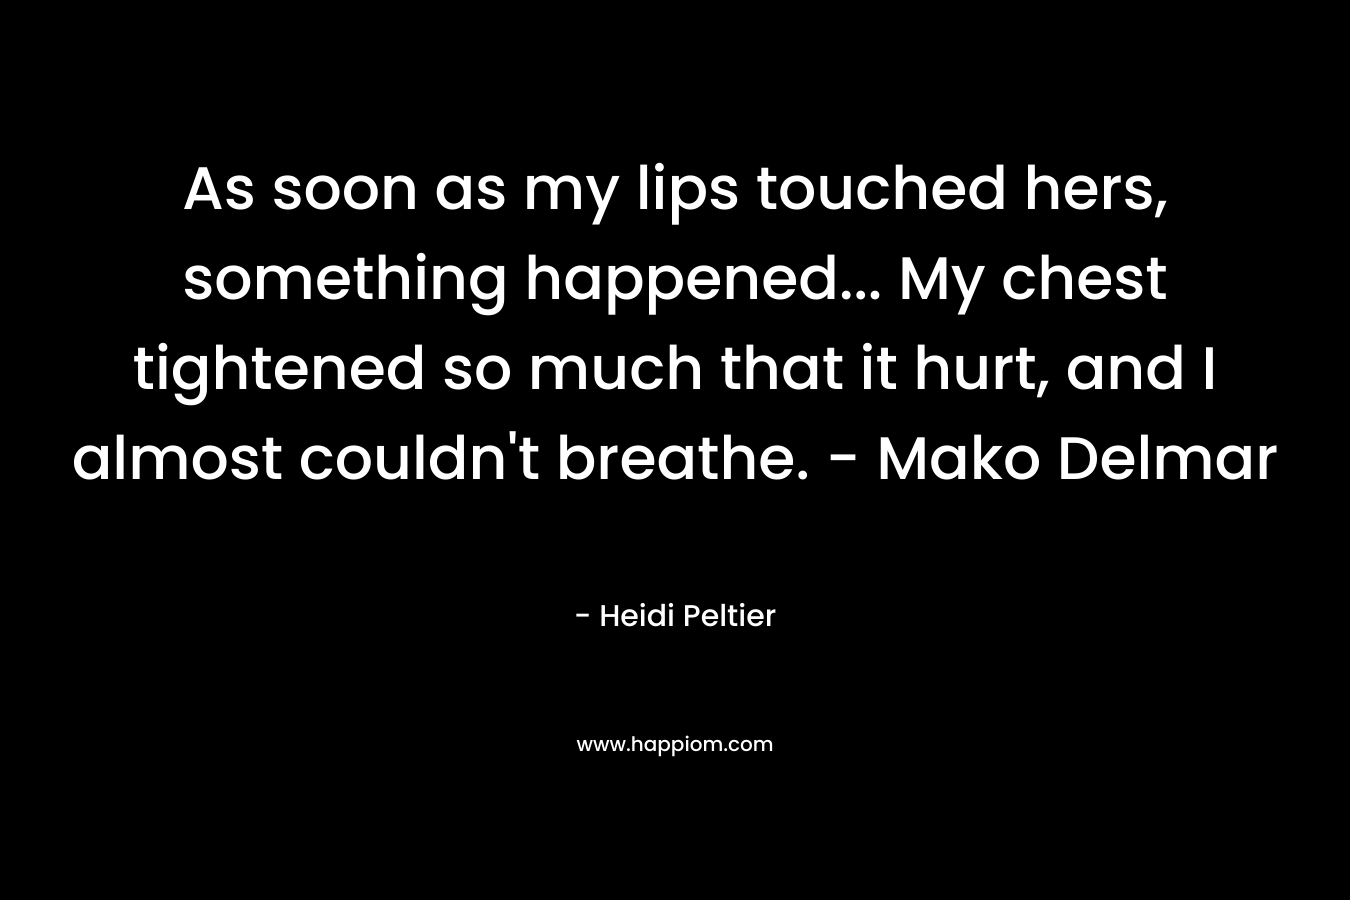 As soon as my lips touched hers, something happened... My chest tightened so much that it hurt, and I almost couldn't breathe. - Mako Delmar